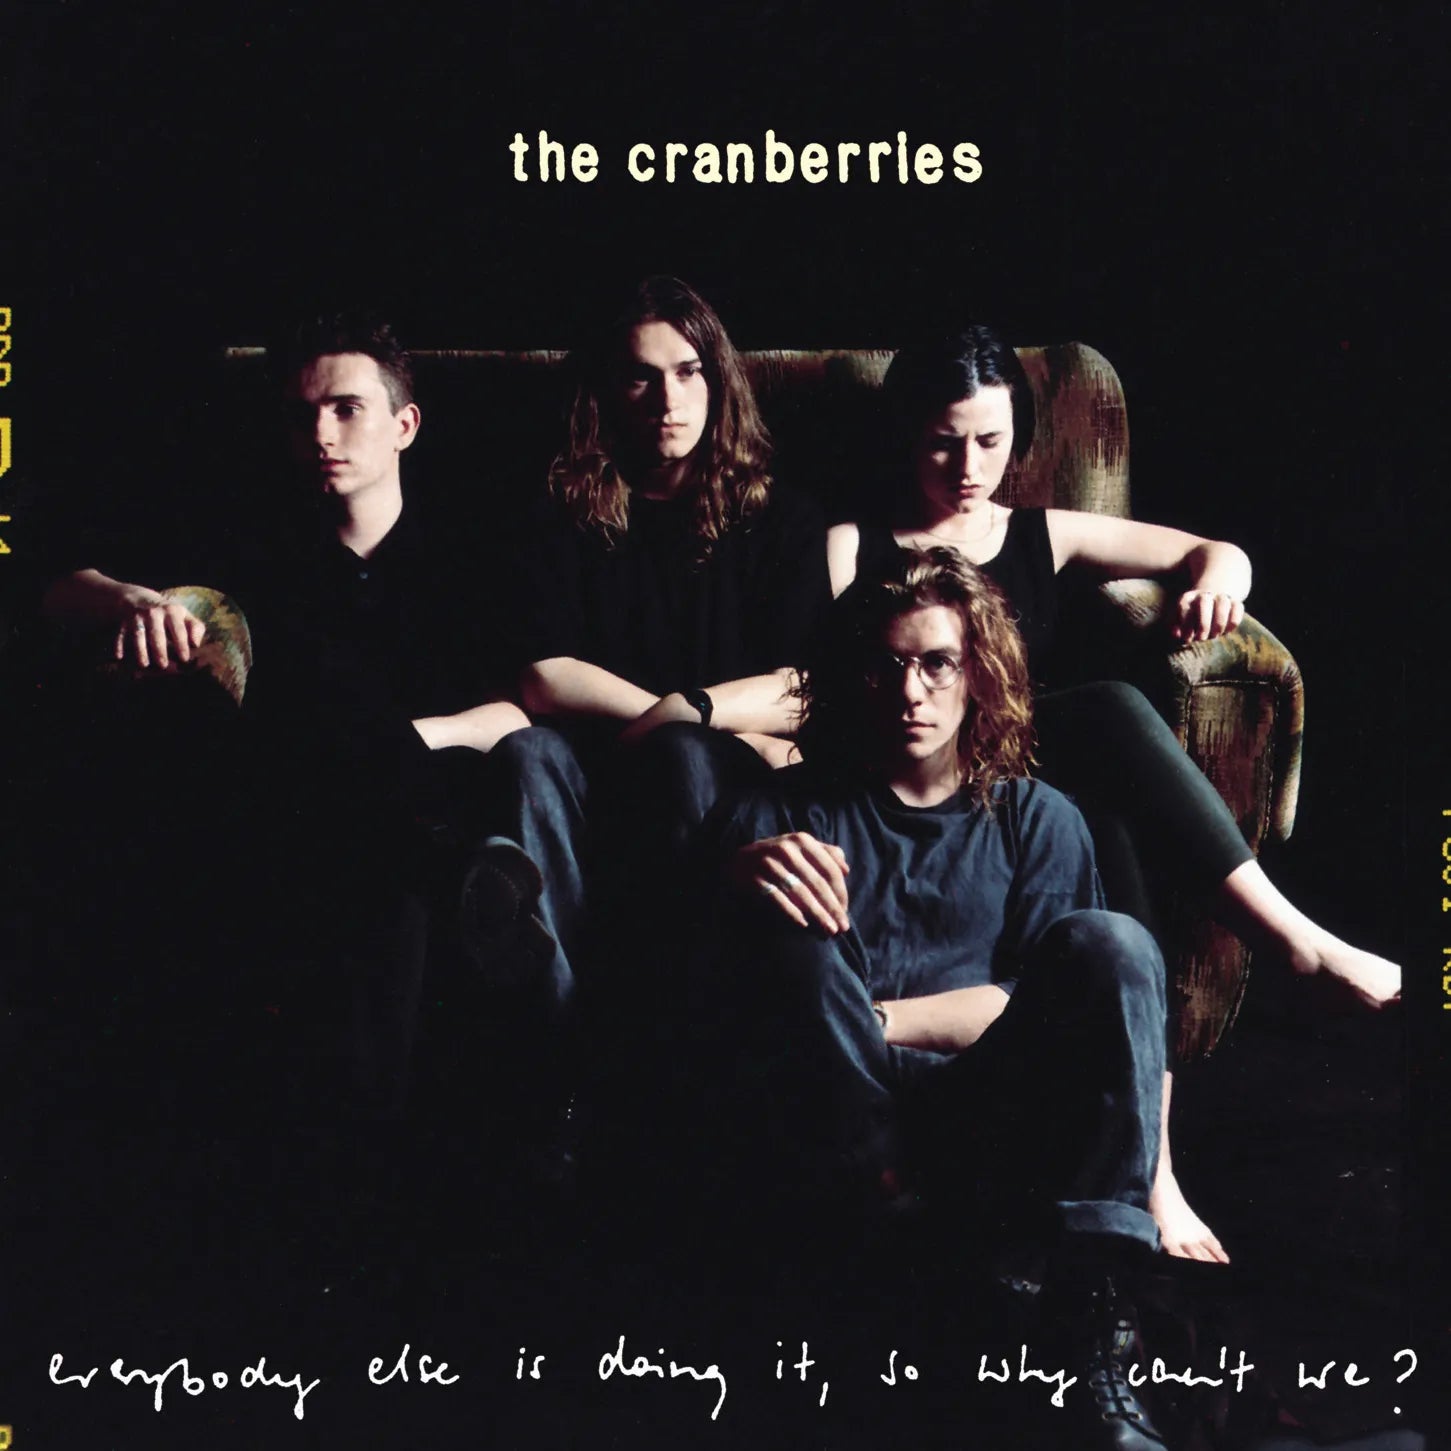 THE CRANBERRIES - EVERYBODY ELSE IS DOING IT, SO WHY CAN'T WE? Vinyl LP